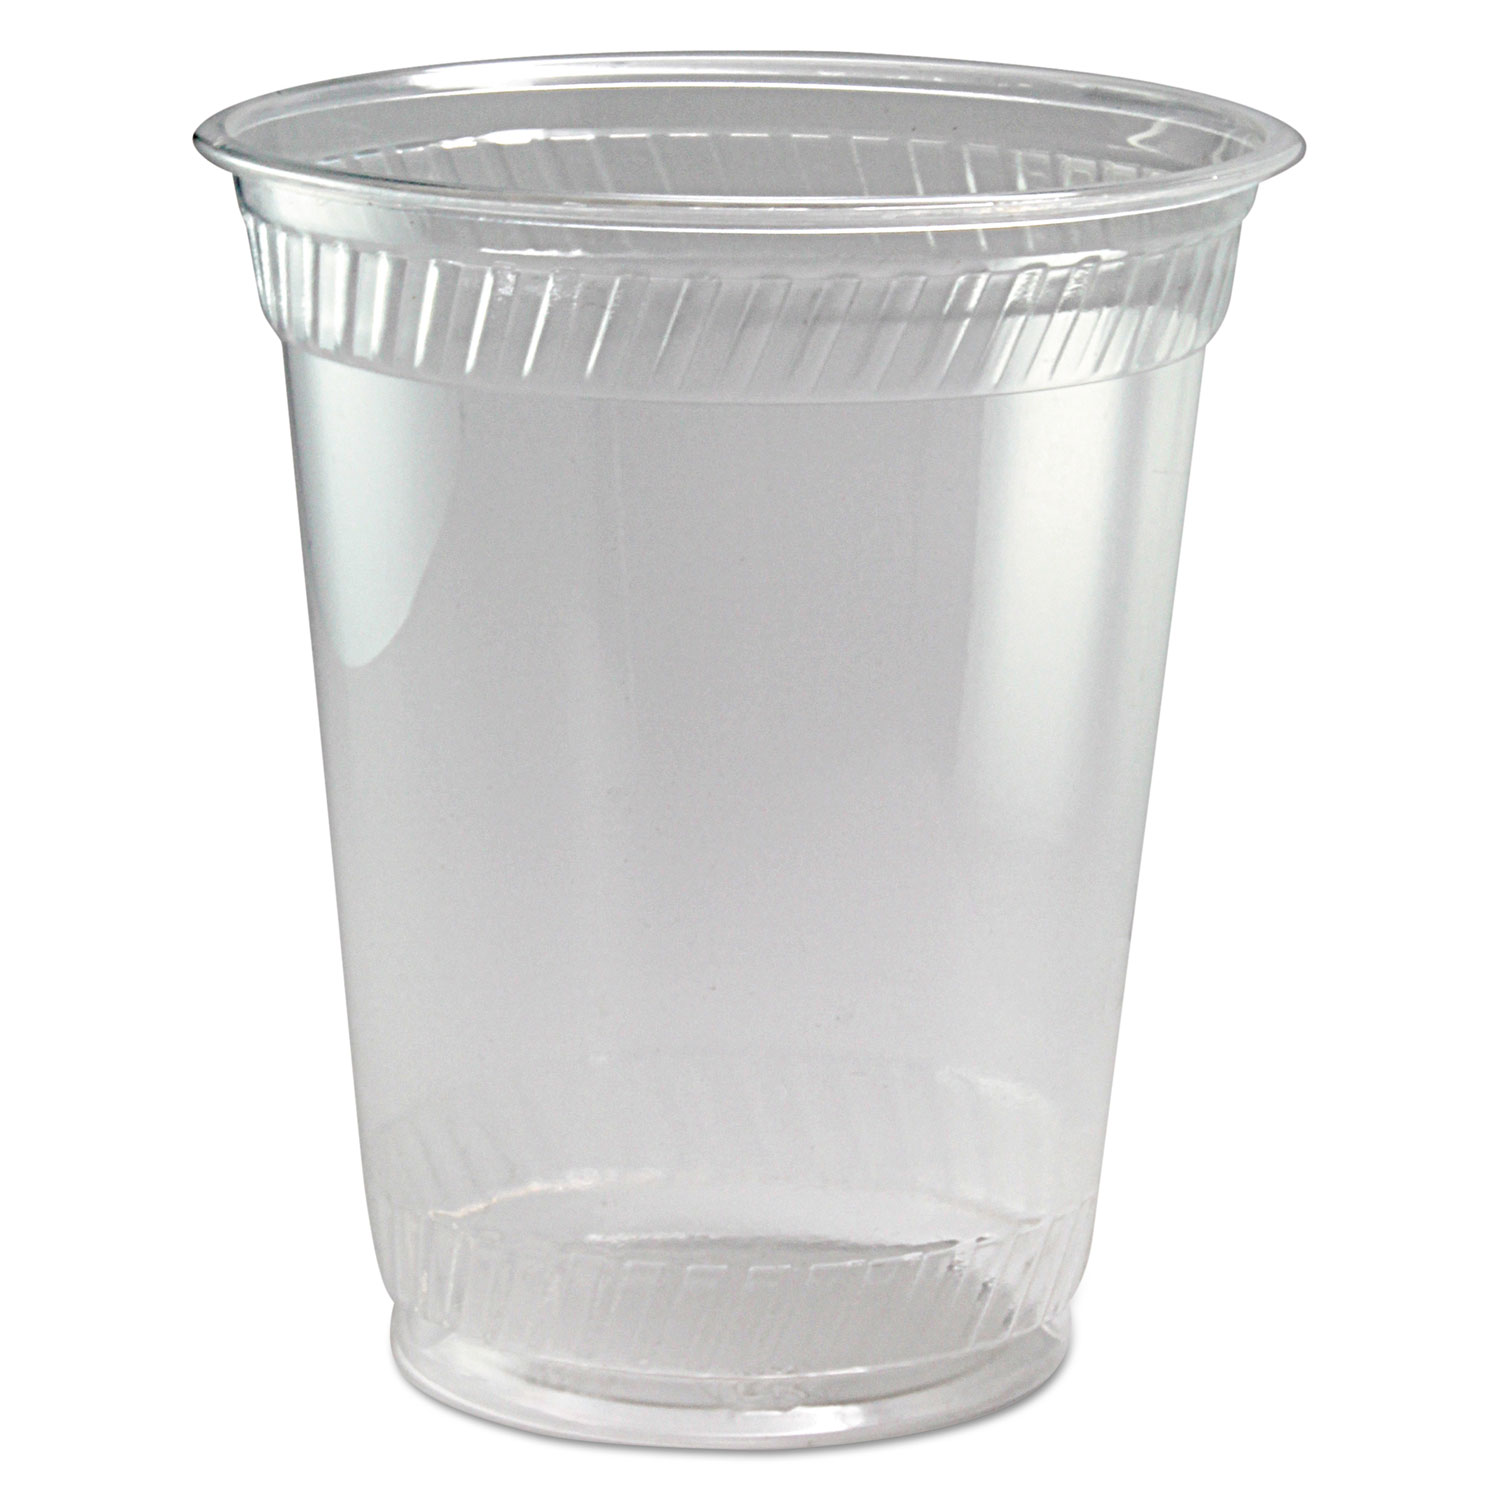  Fabri-Kal 9509104 Greenware Cold Drink Cups, Clear, 12 oz., 1000/Carton (FABGC12S) 